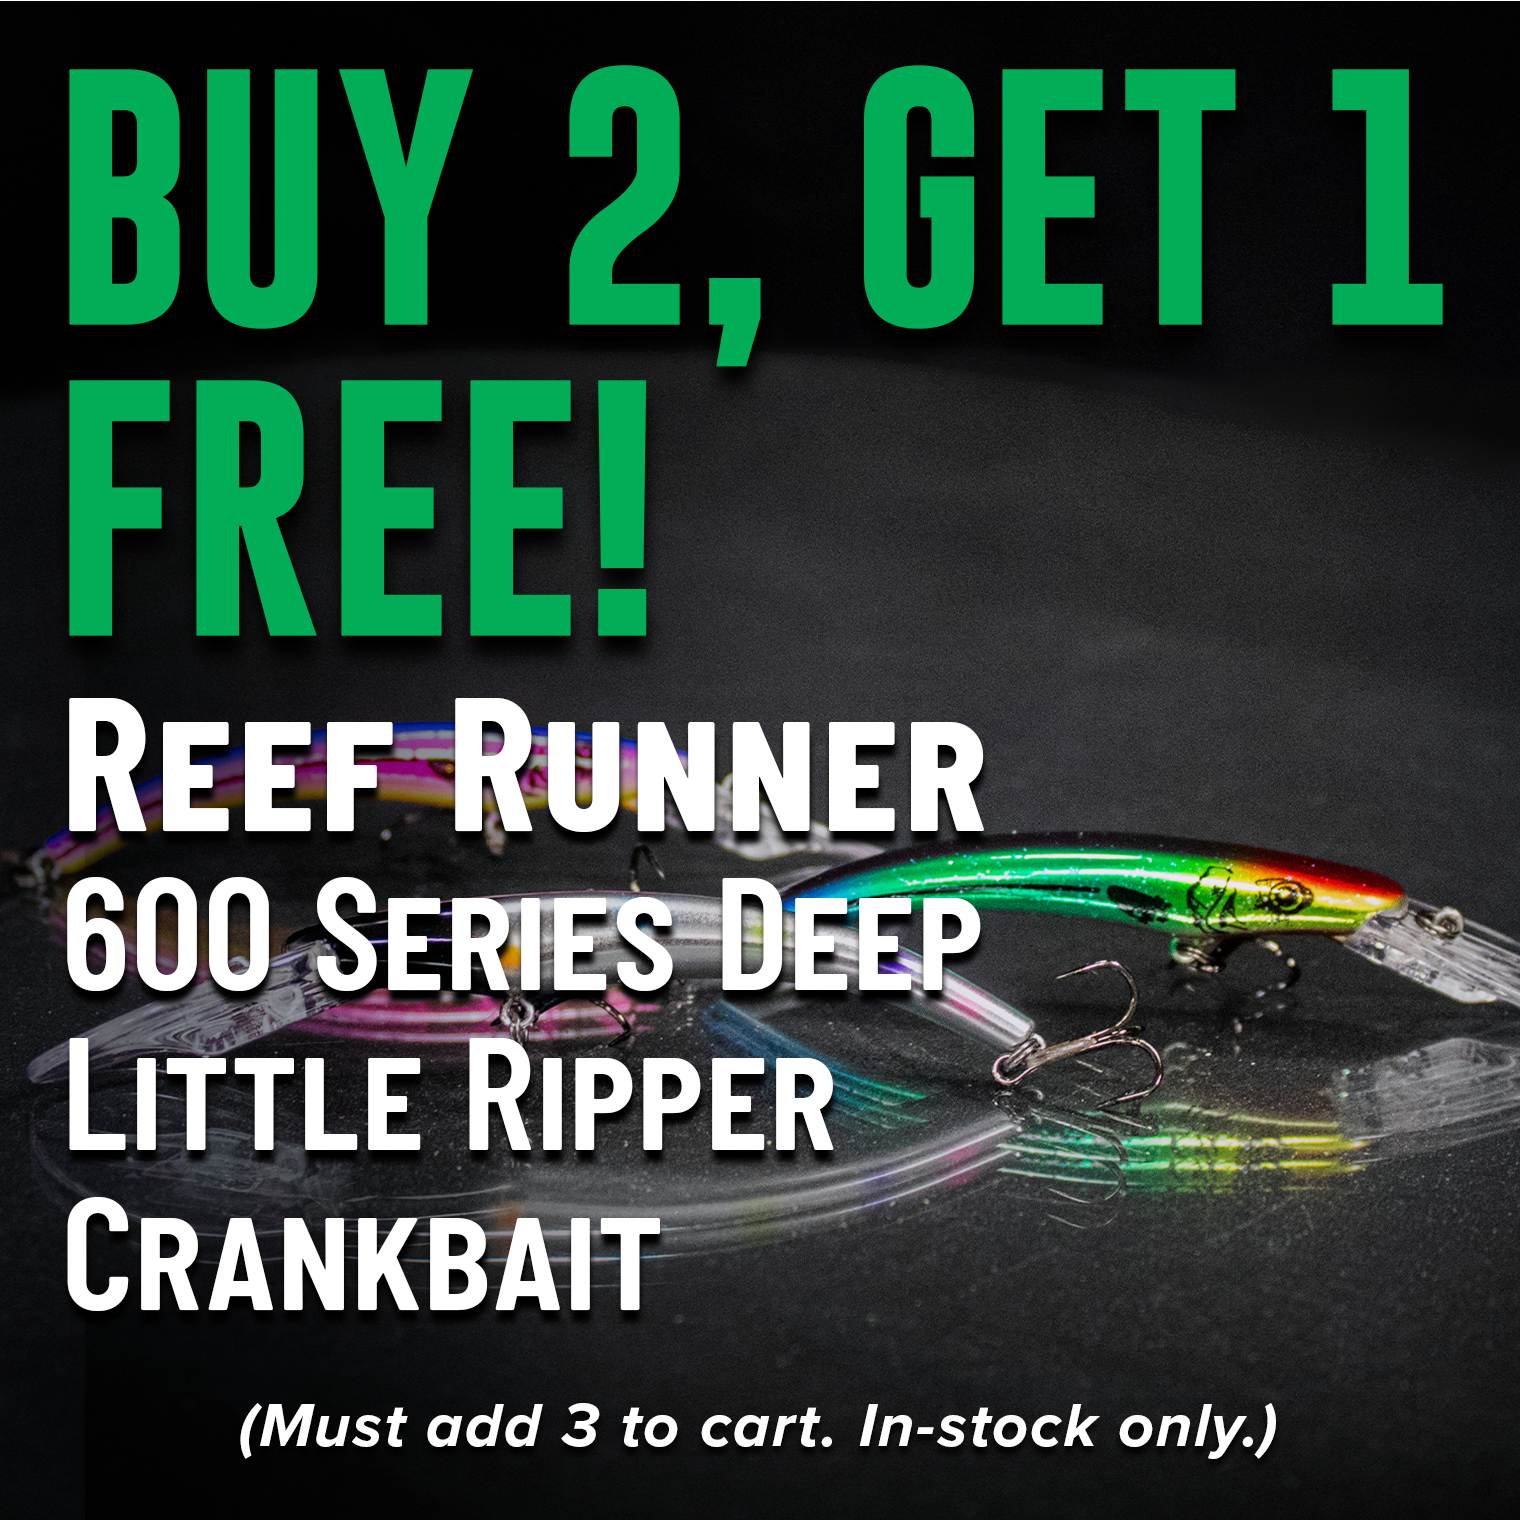 Buy 2, Get 1 Free! Reef Runner 600 Series Deep Little Ripper Crankbait (Must add 3 to cart. In-stock only.)